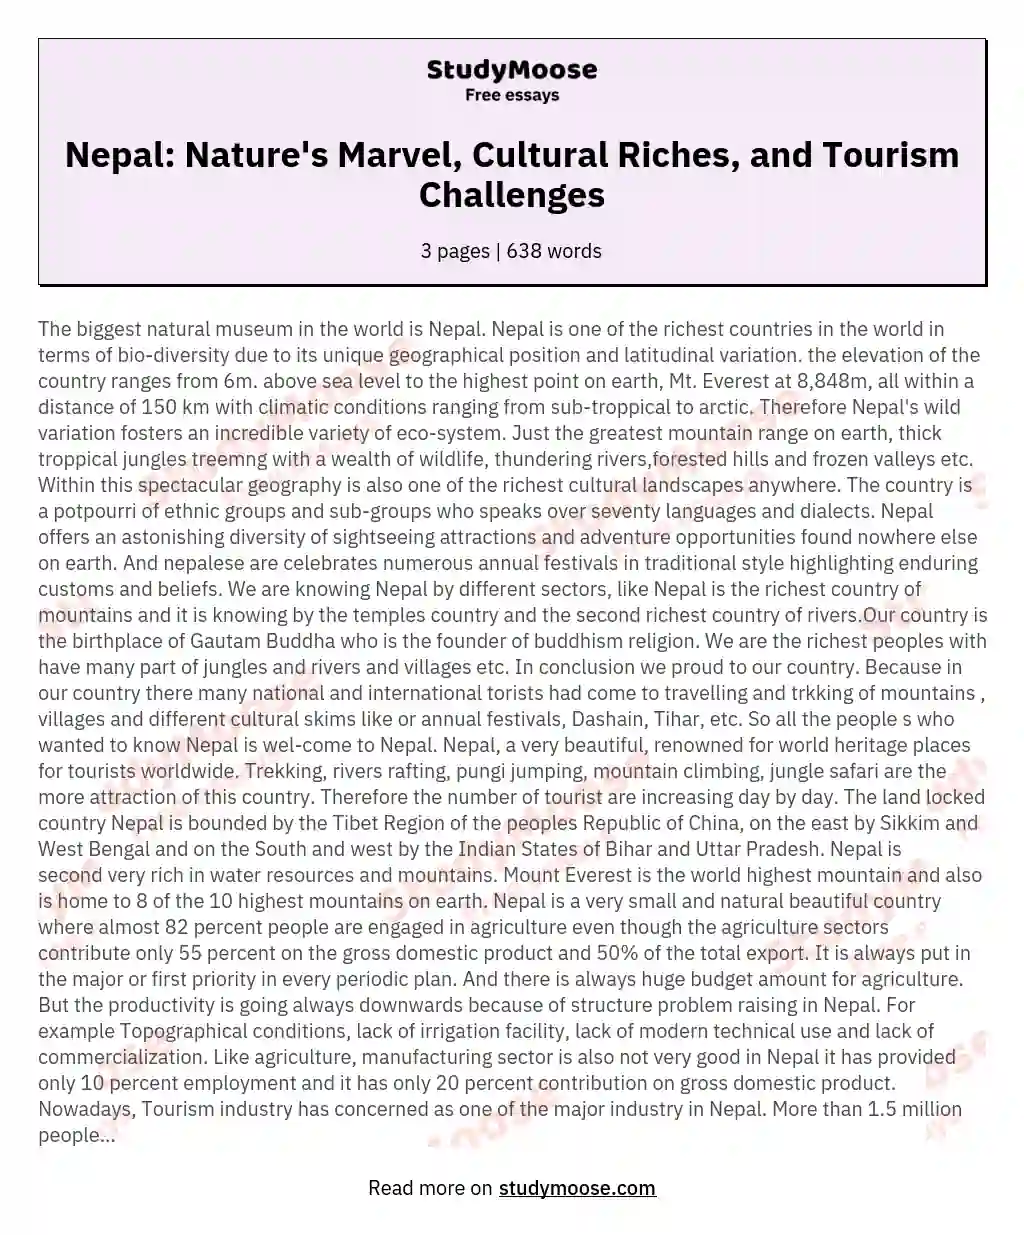 Nepal: Nature's Marvel, Cultural Riches, and Tourism Challenges essay